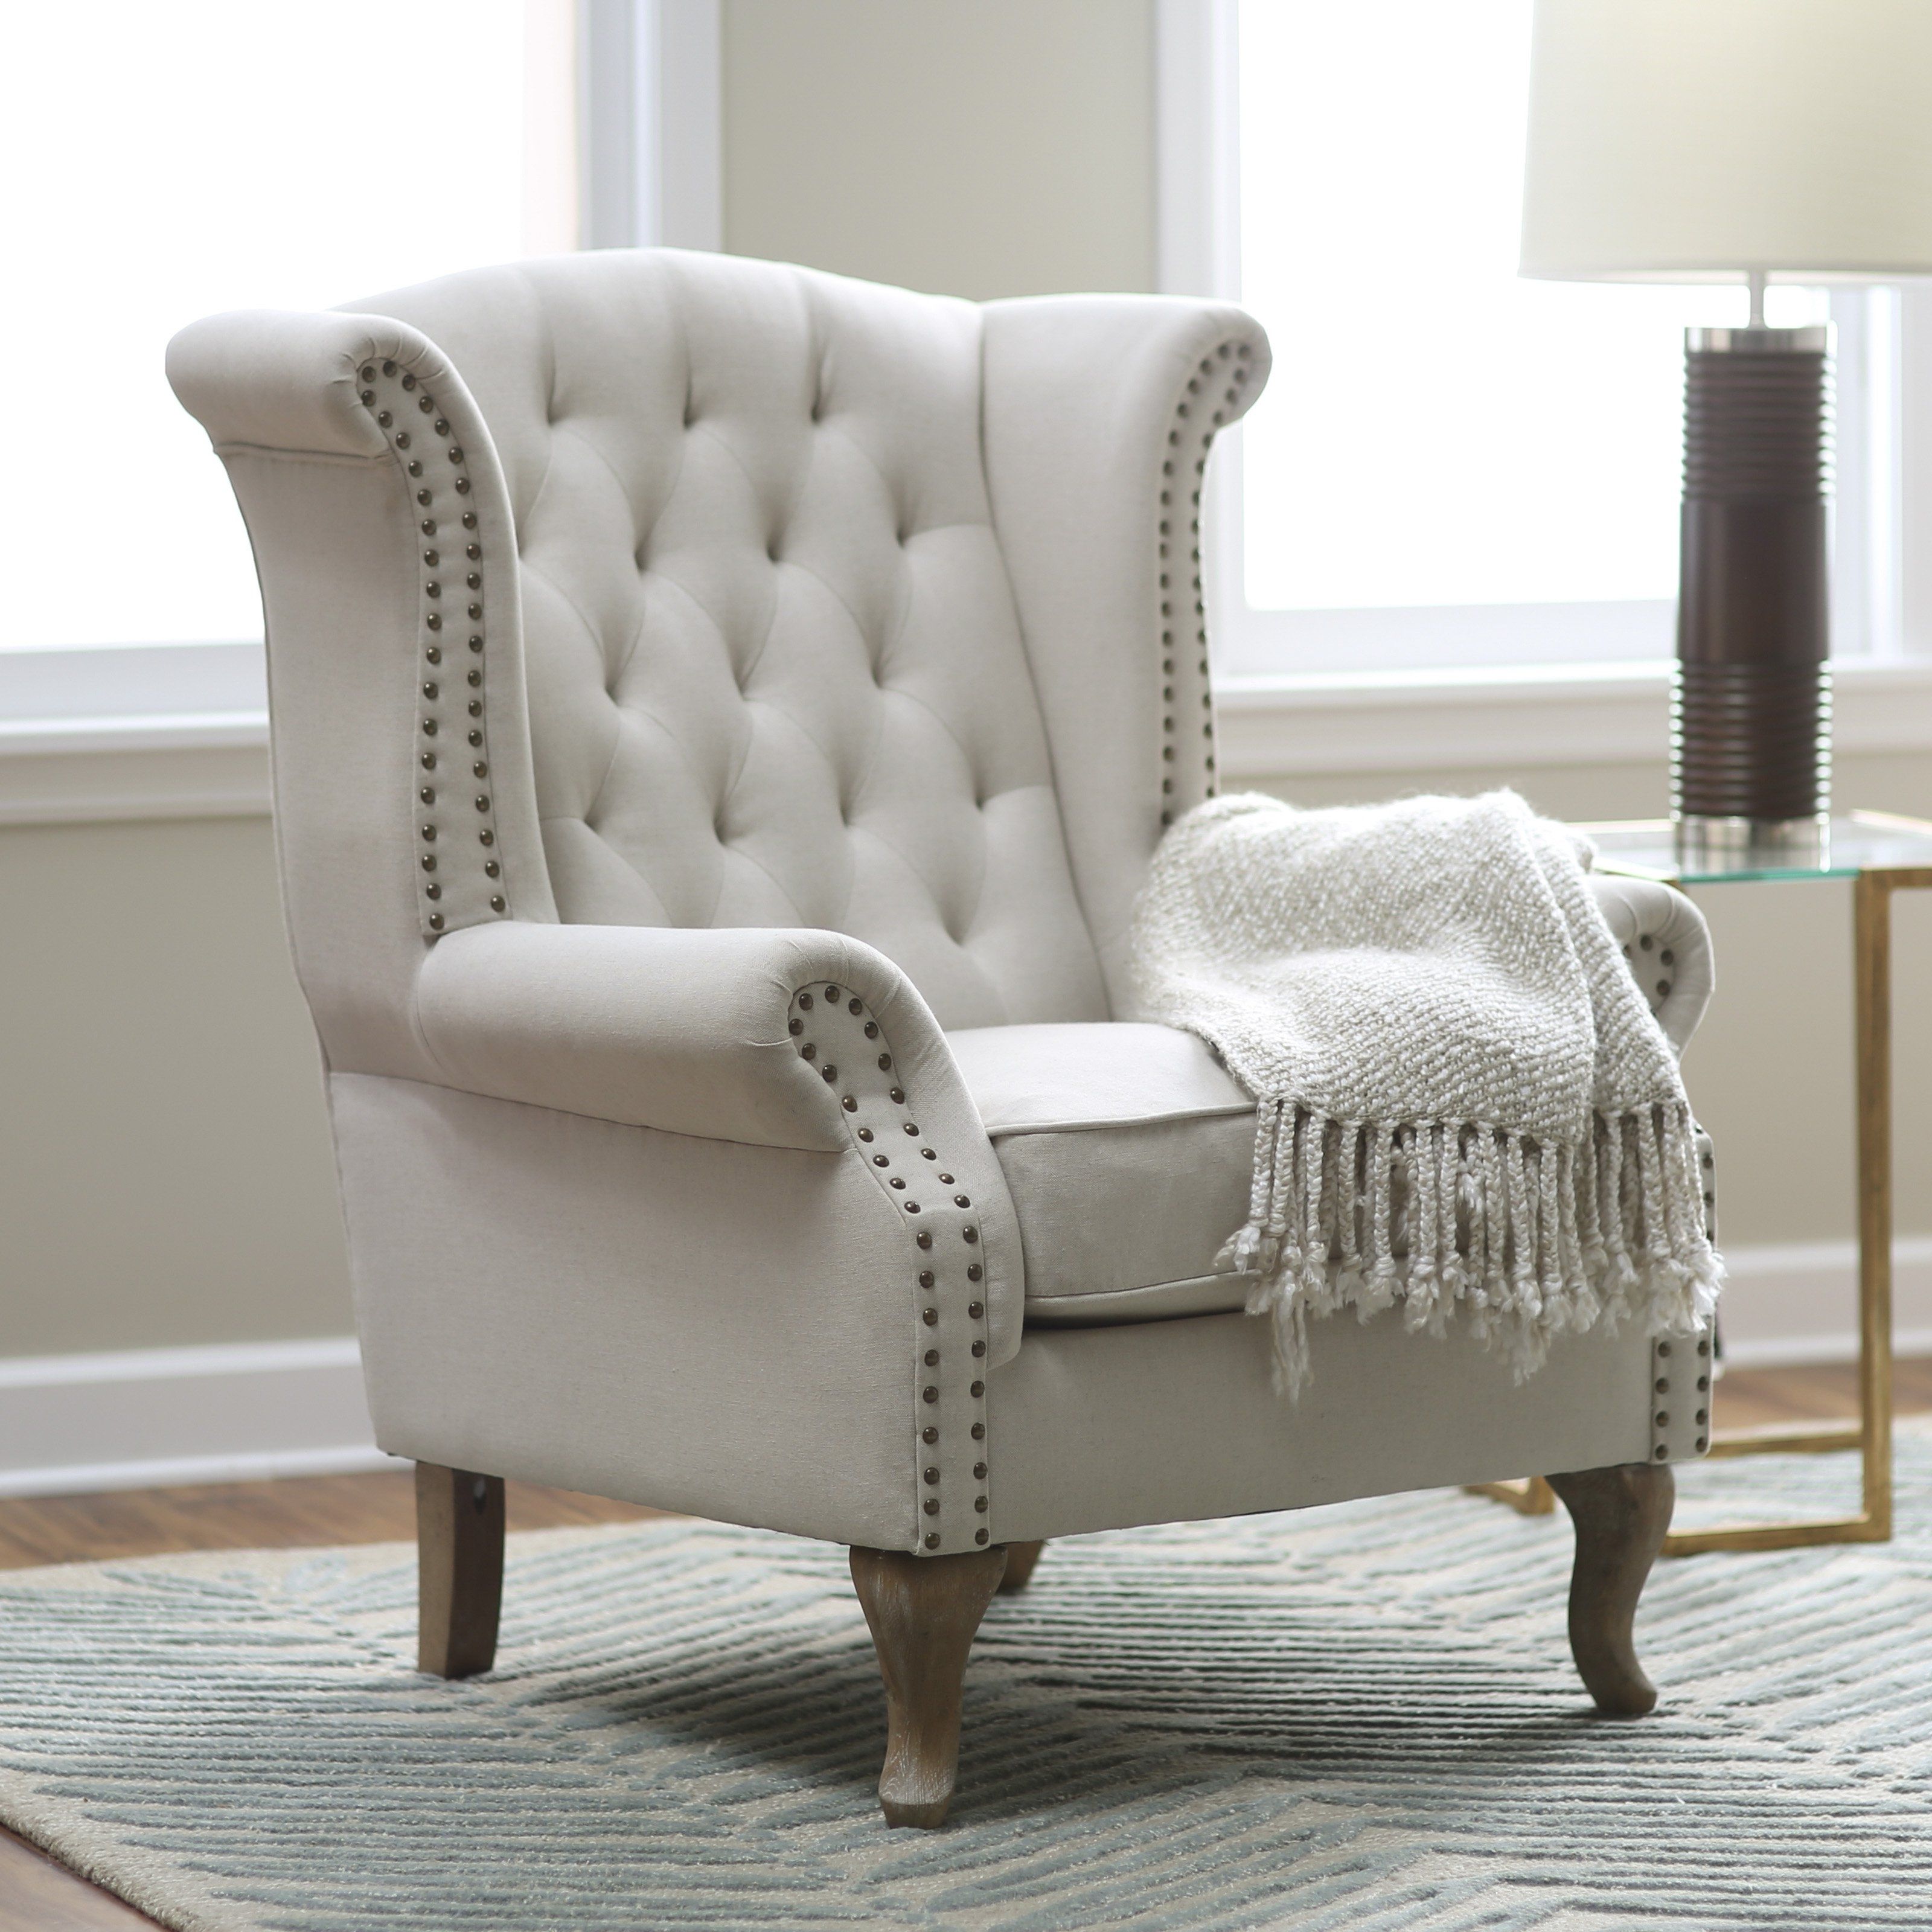 Chairs : Upholstered Accent Chairs Living Room Ideas With Stunning Inside 2019 Sofa Arm Chairs (View 8 of 20)